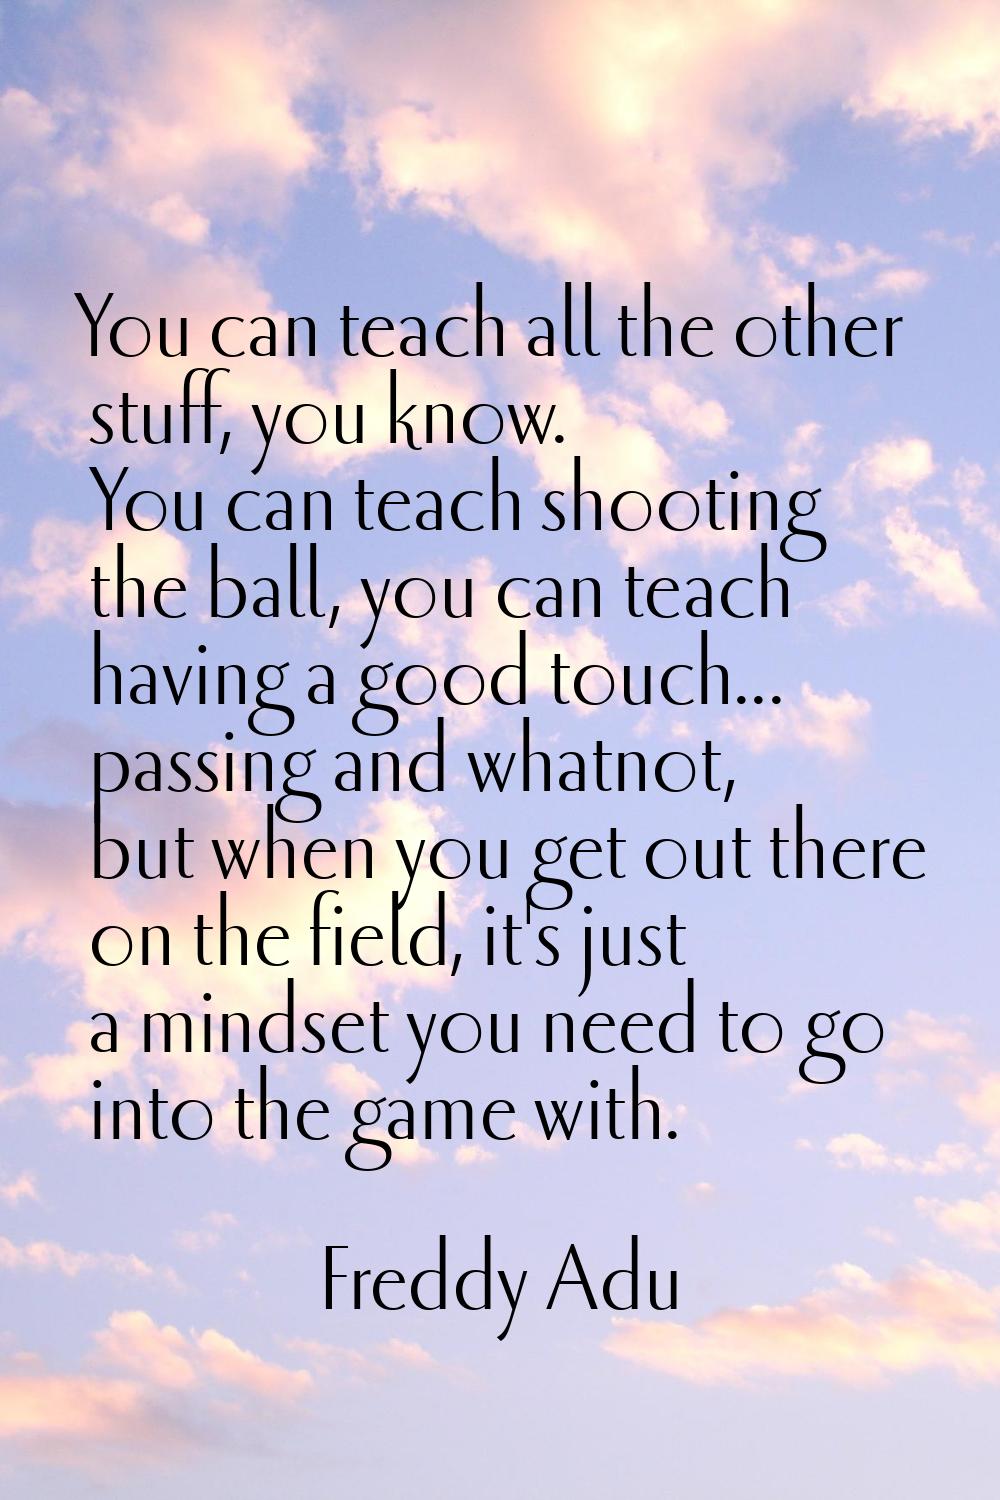 You can teach all the other stuff, you know. You can teach shooting the ball, you can teach having 